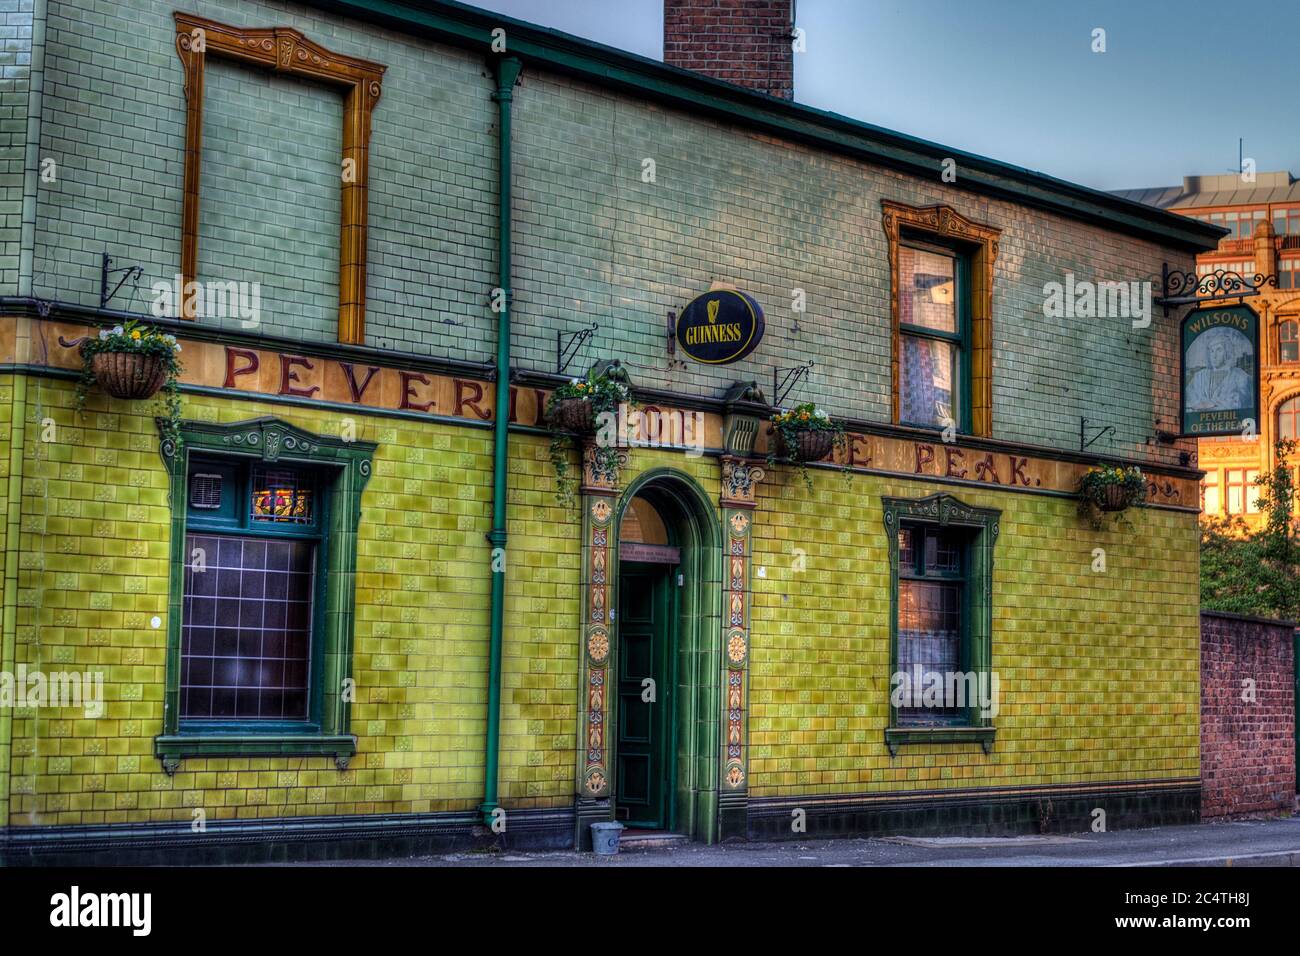 Pub, British, architecture, buildings, Manchester, stylish and retro, pubs given new life, Peveril of the Peak, Guinness Stock Photo